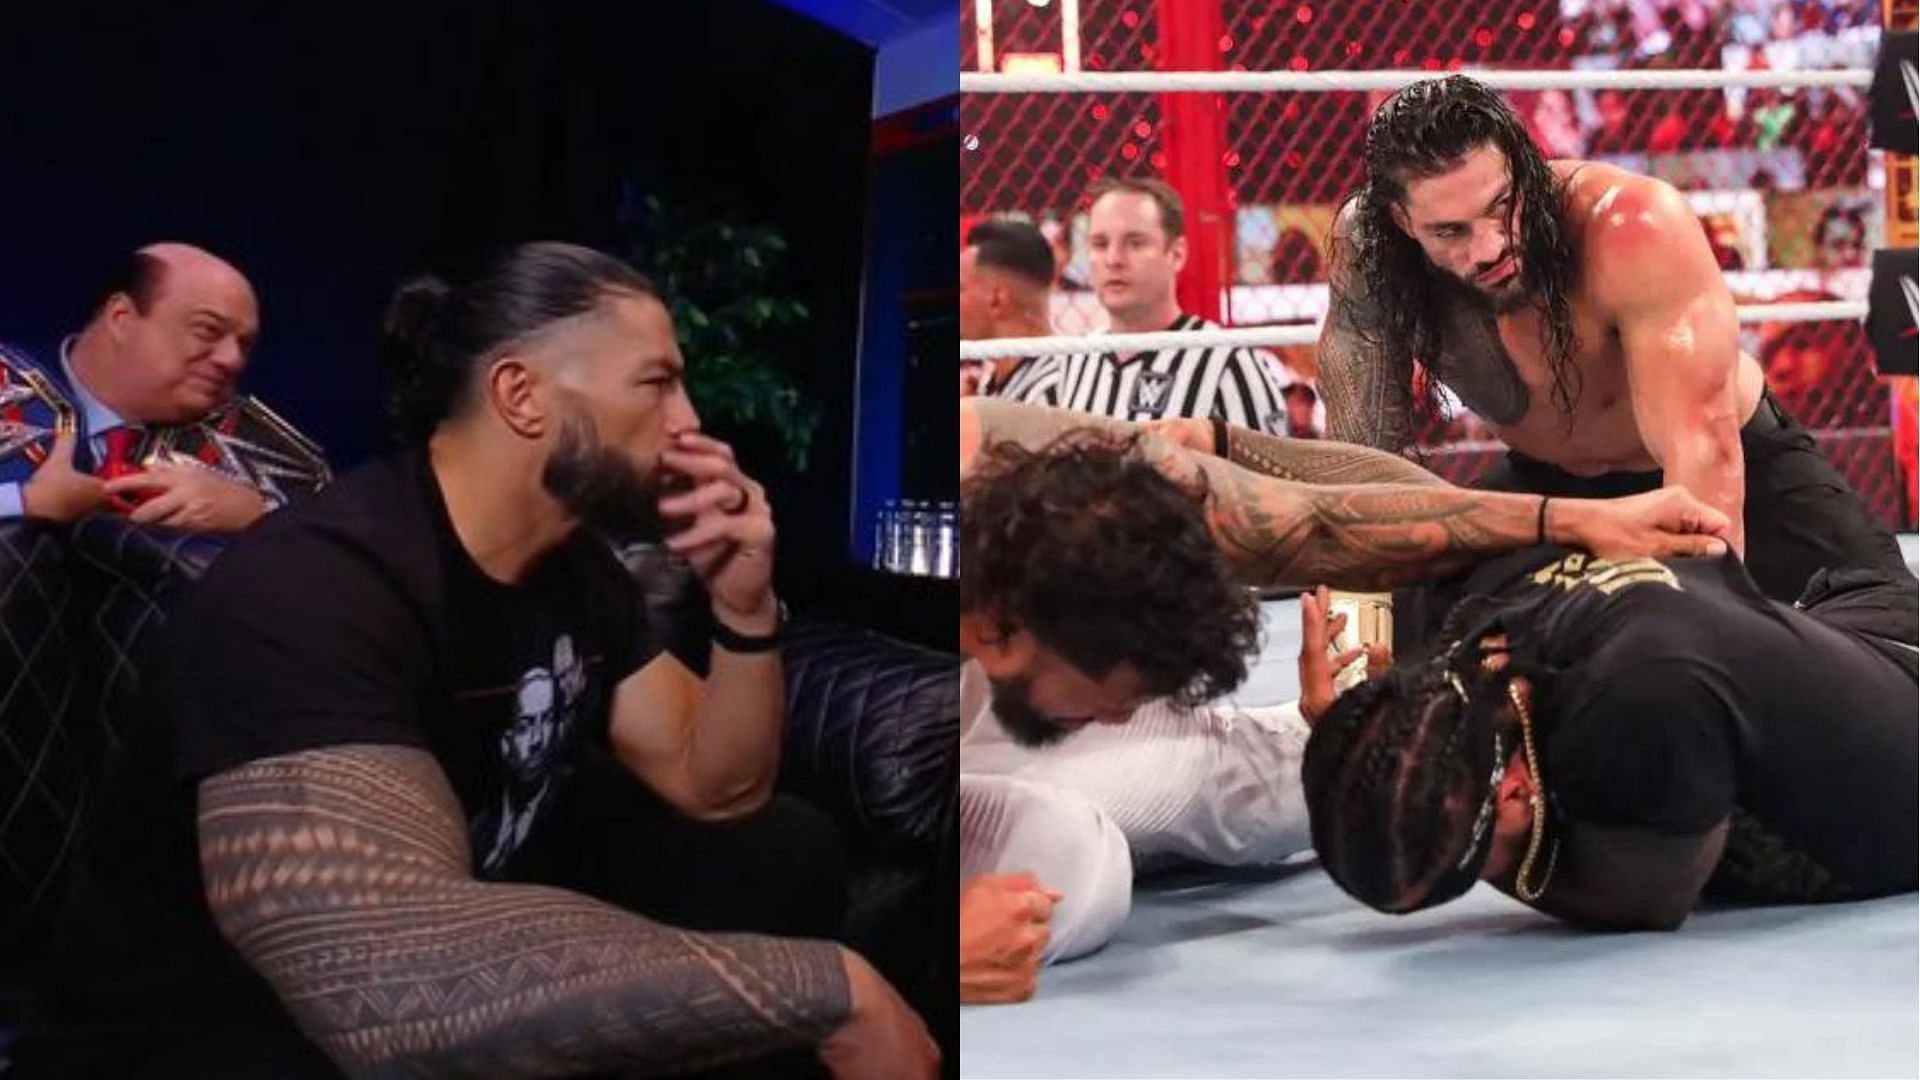 Will Jimmy Uso pay the price next week on behalf of his brother?